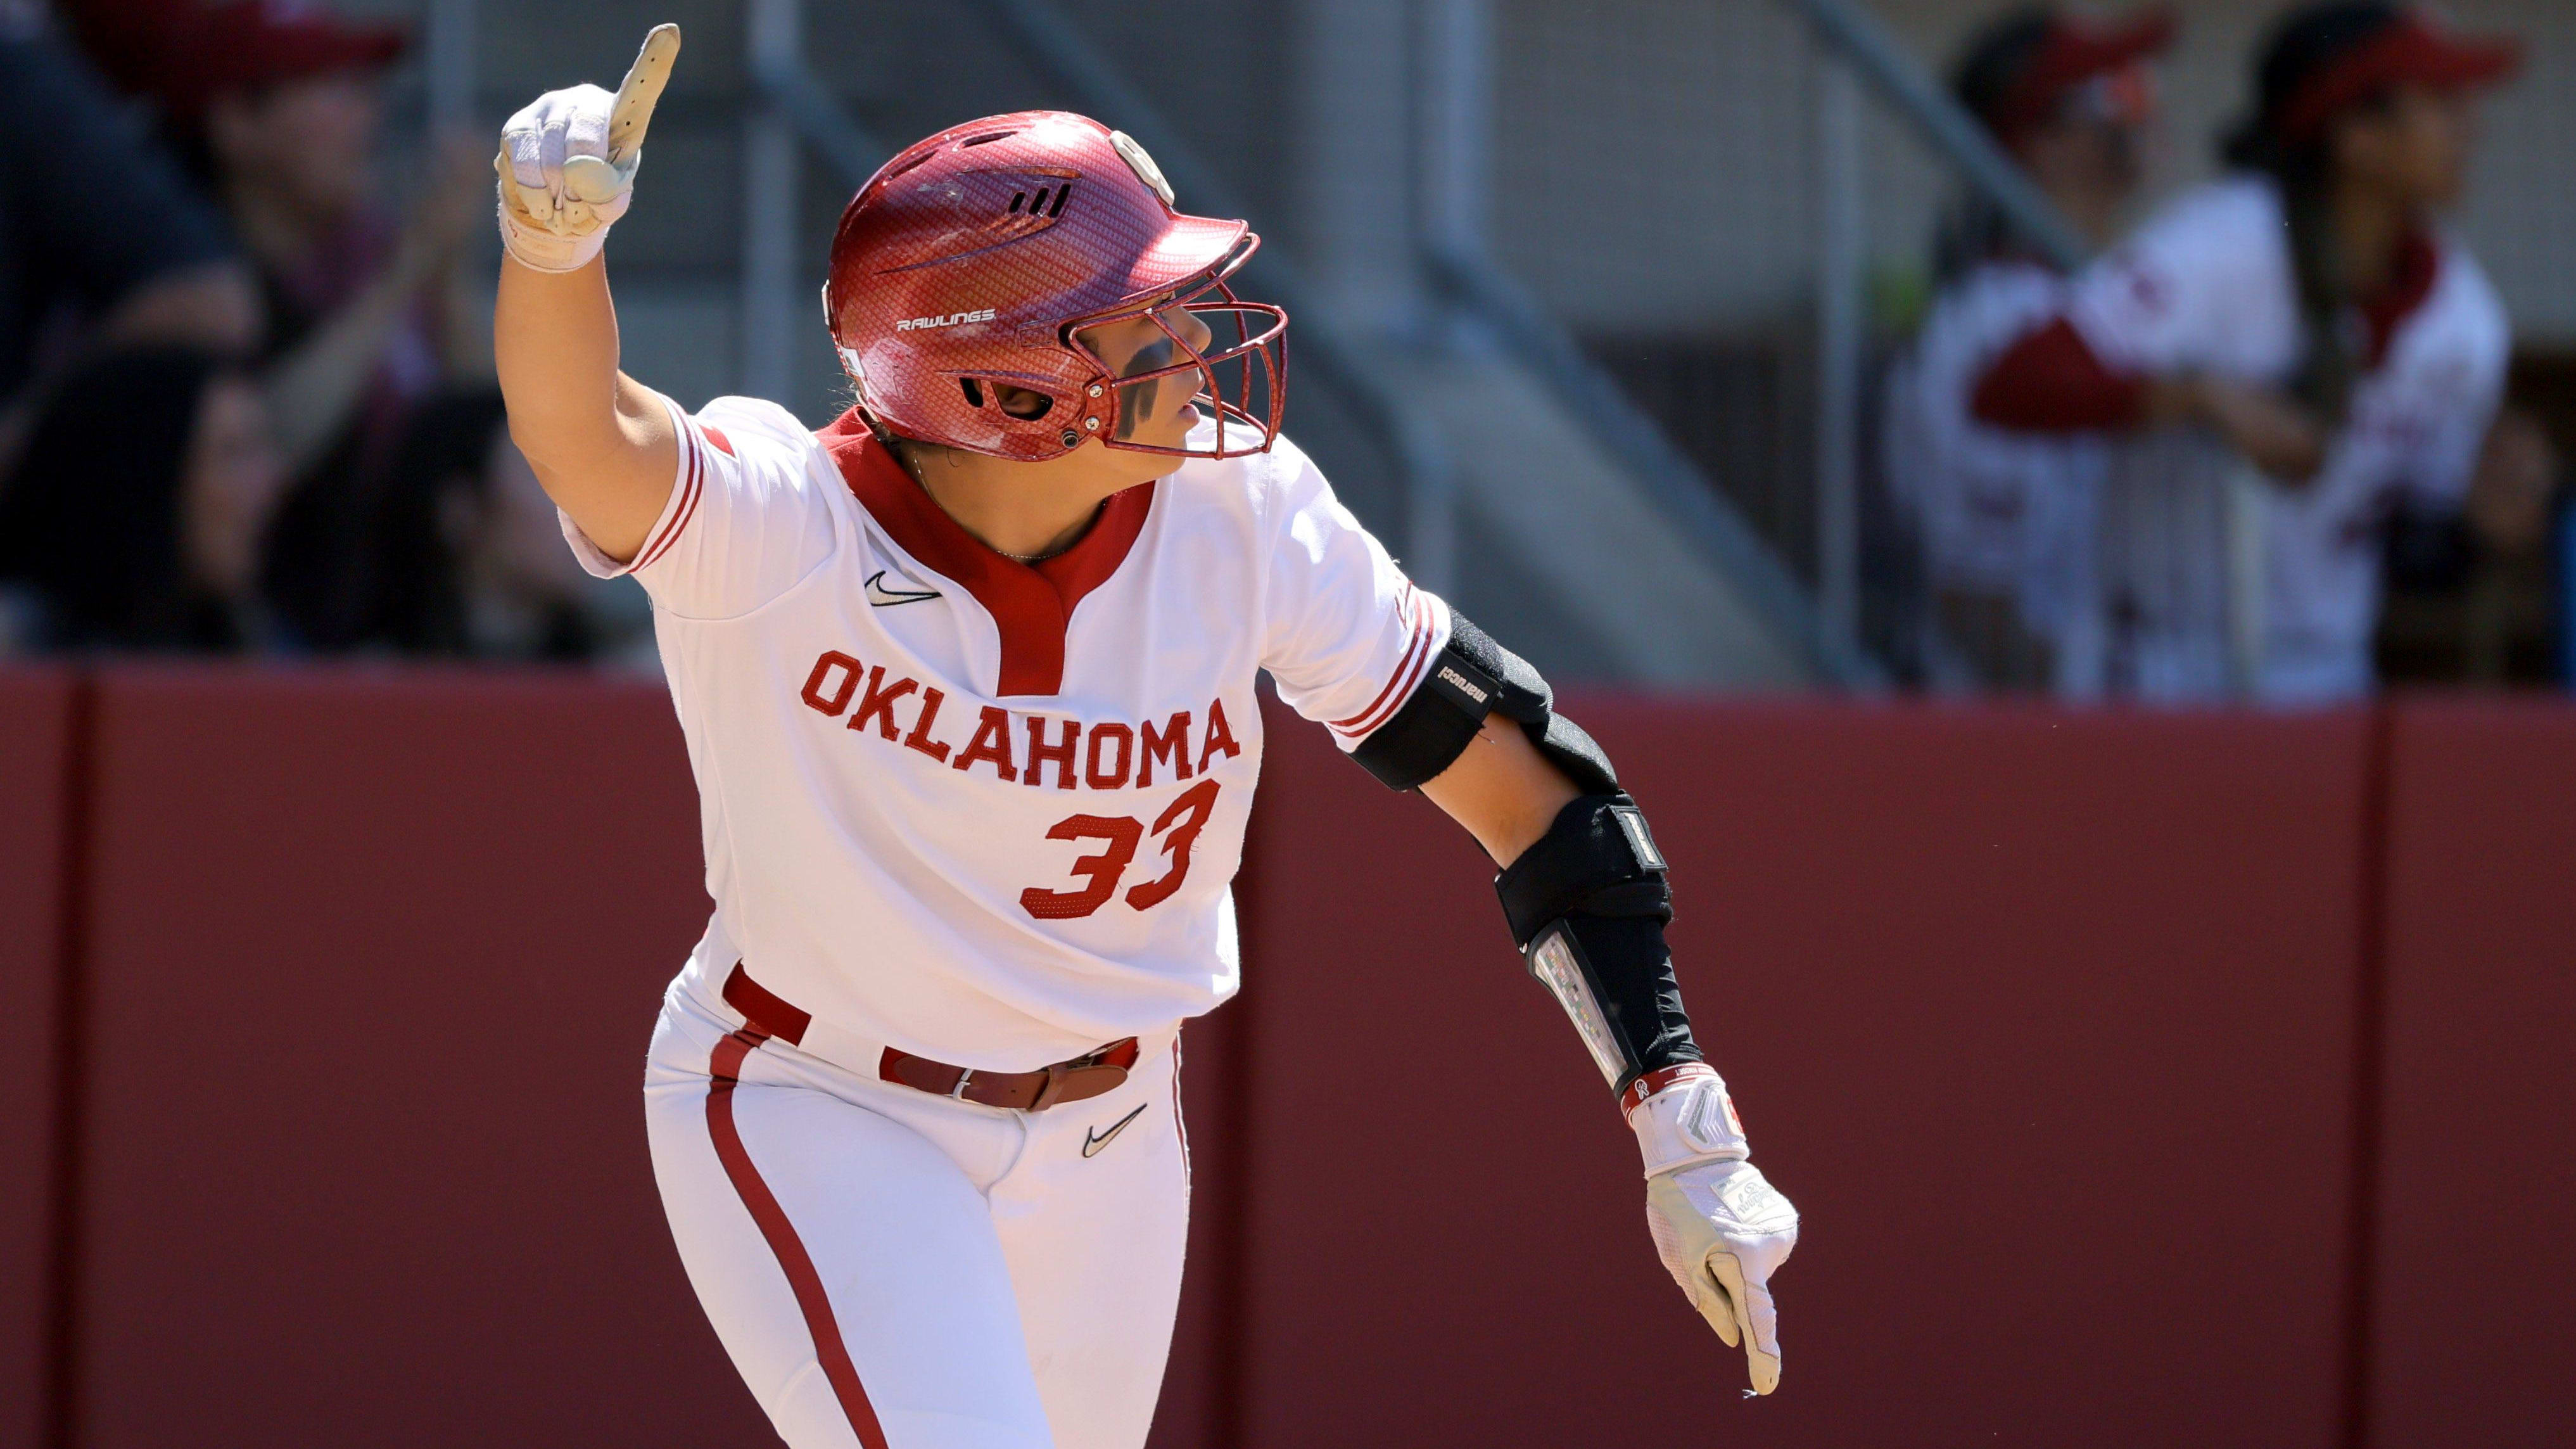 OU Softball: Oklahoma Rides Fast Start to Open Series With Win Over UCF